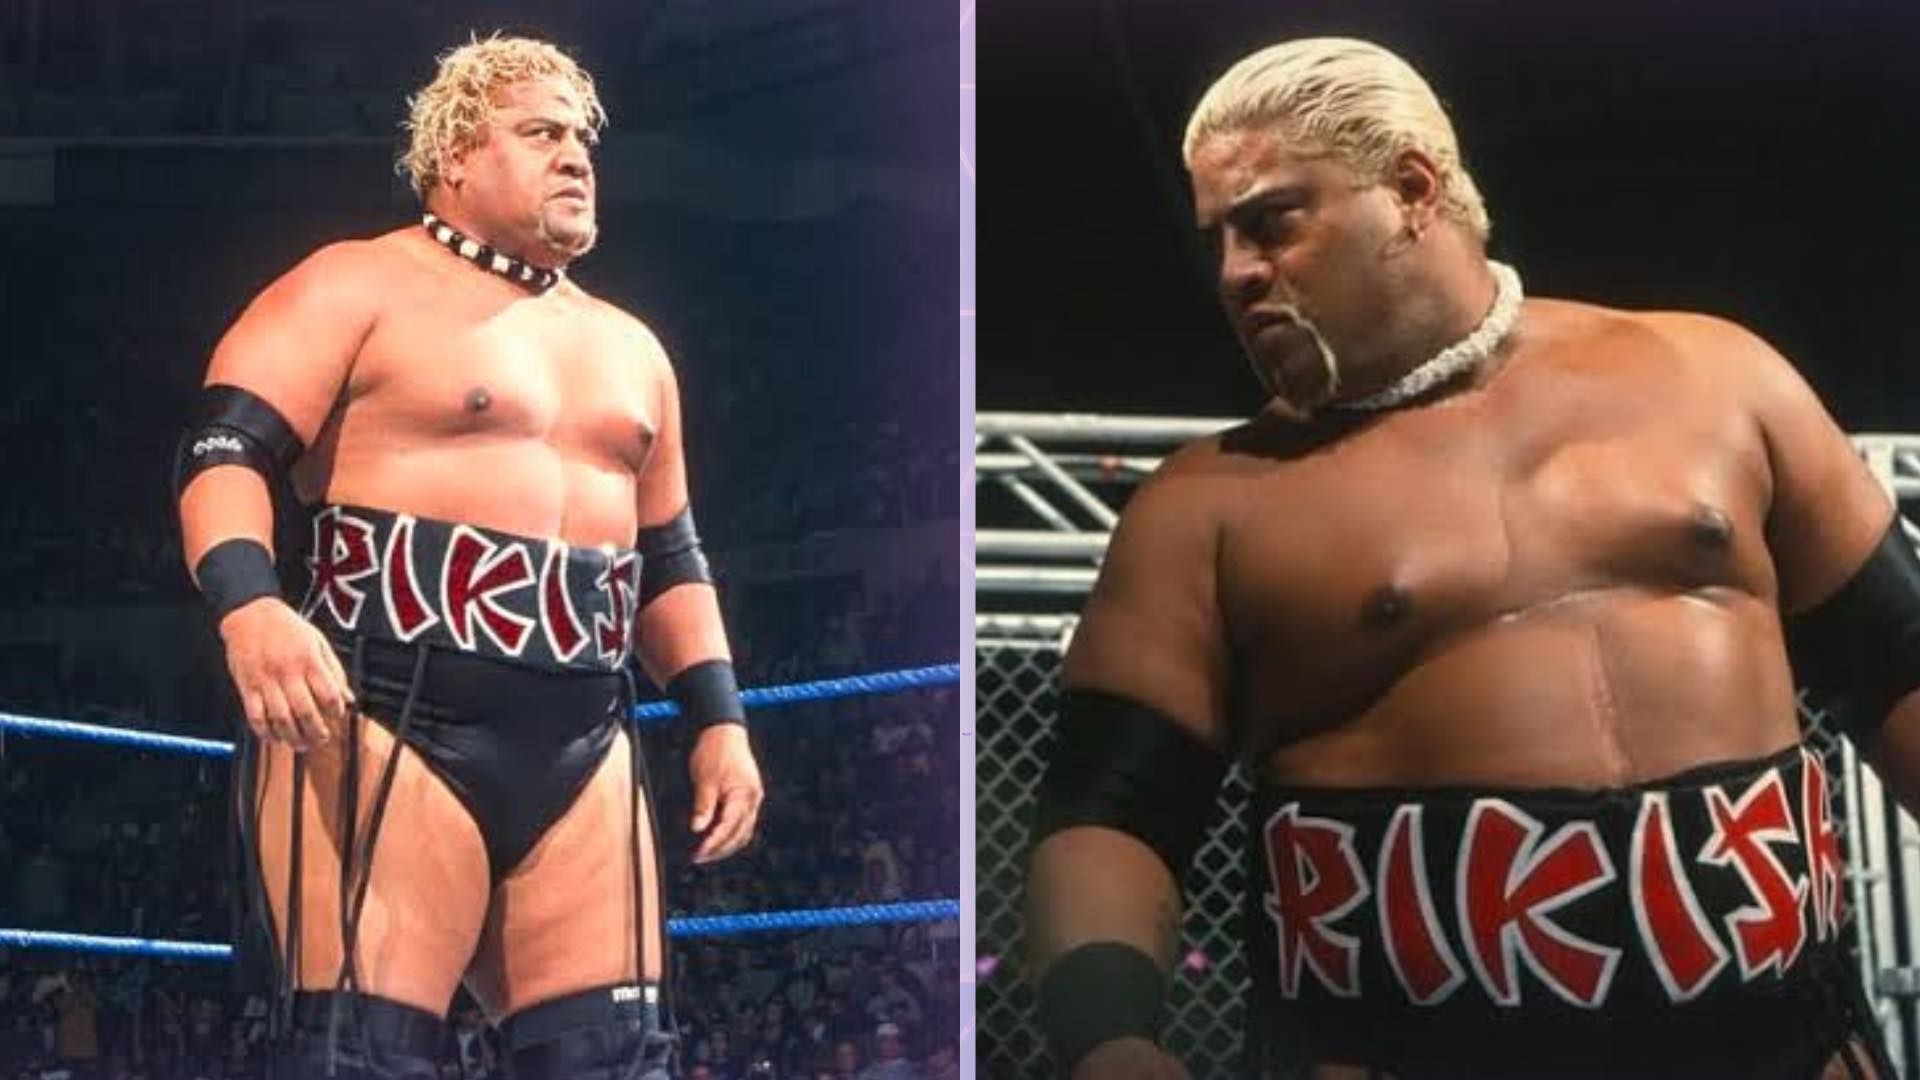 Rikishi had something to share with the fans